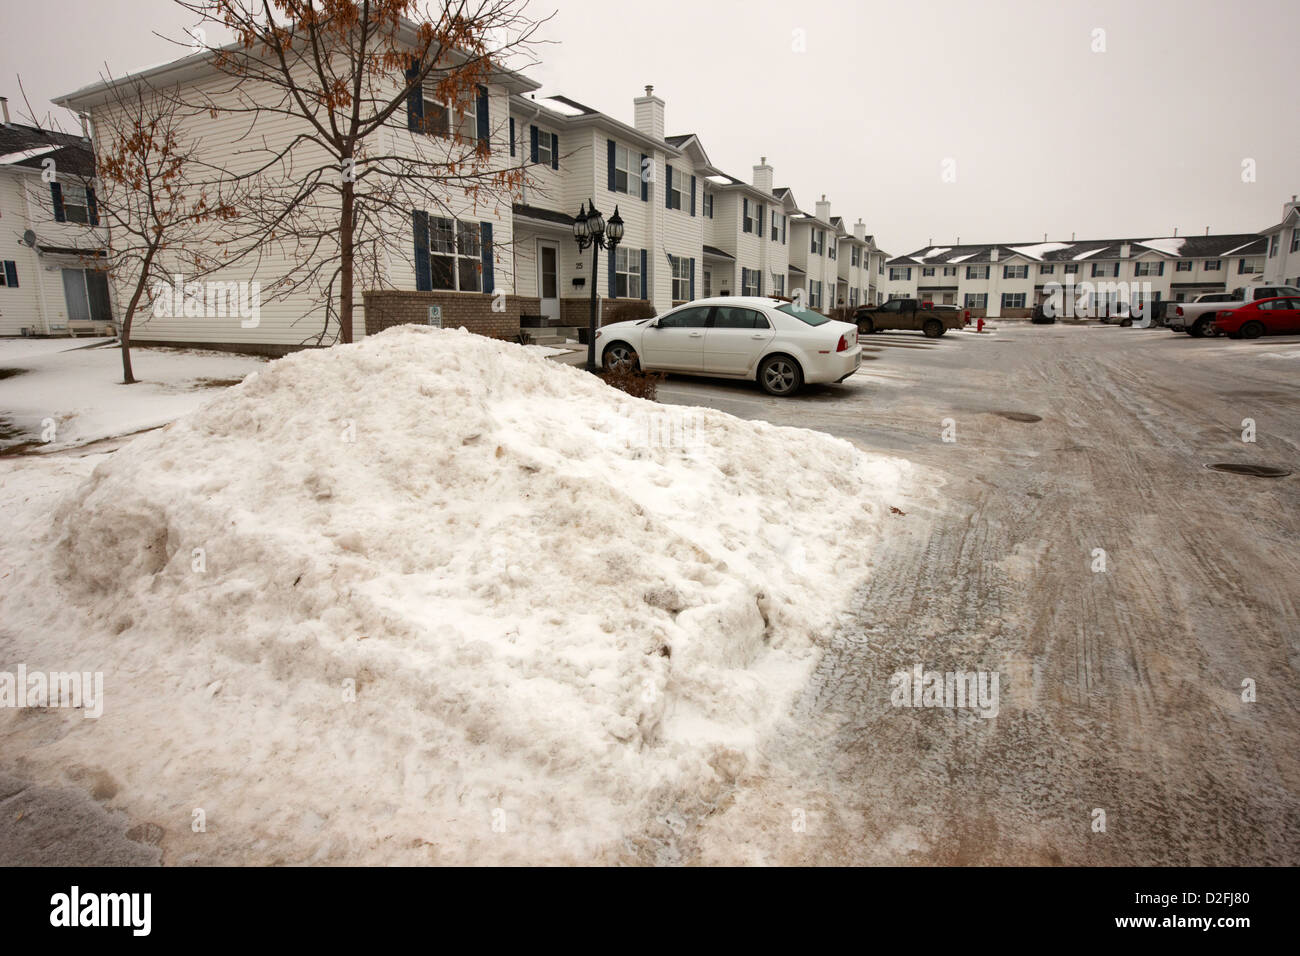 large piles of snow piled up for removal from residential area Saskatoon Saskatchewan Canada Stock Photo